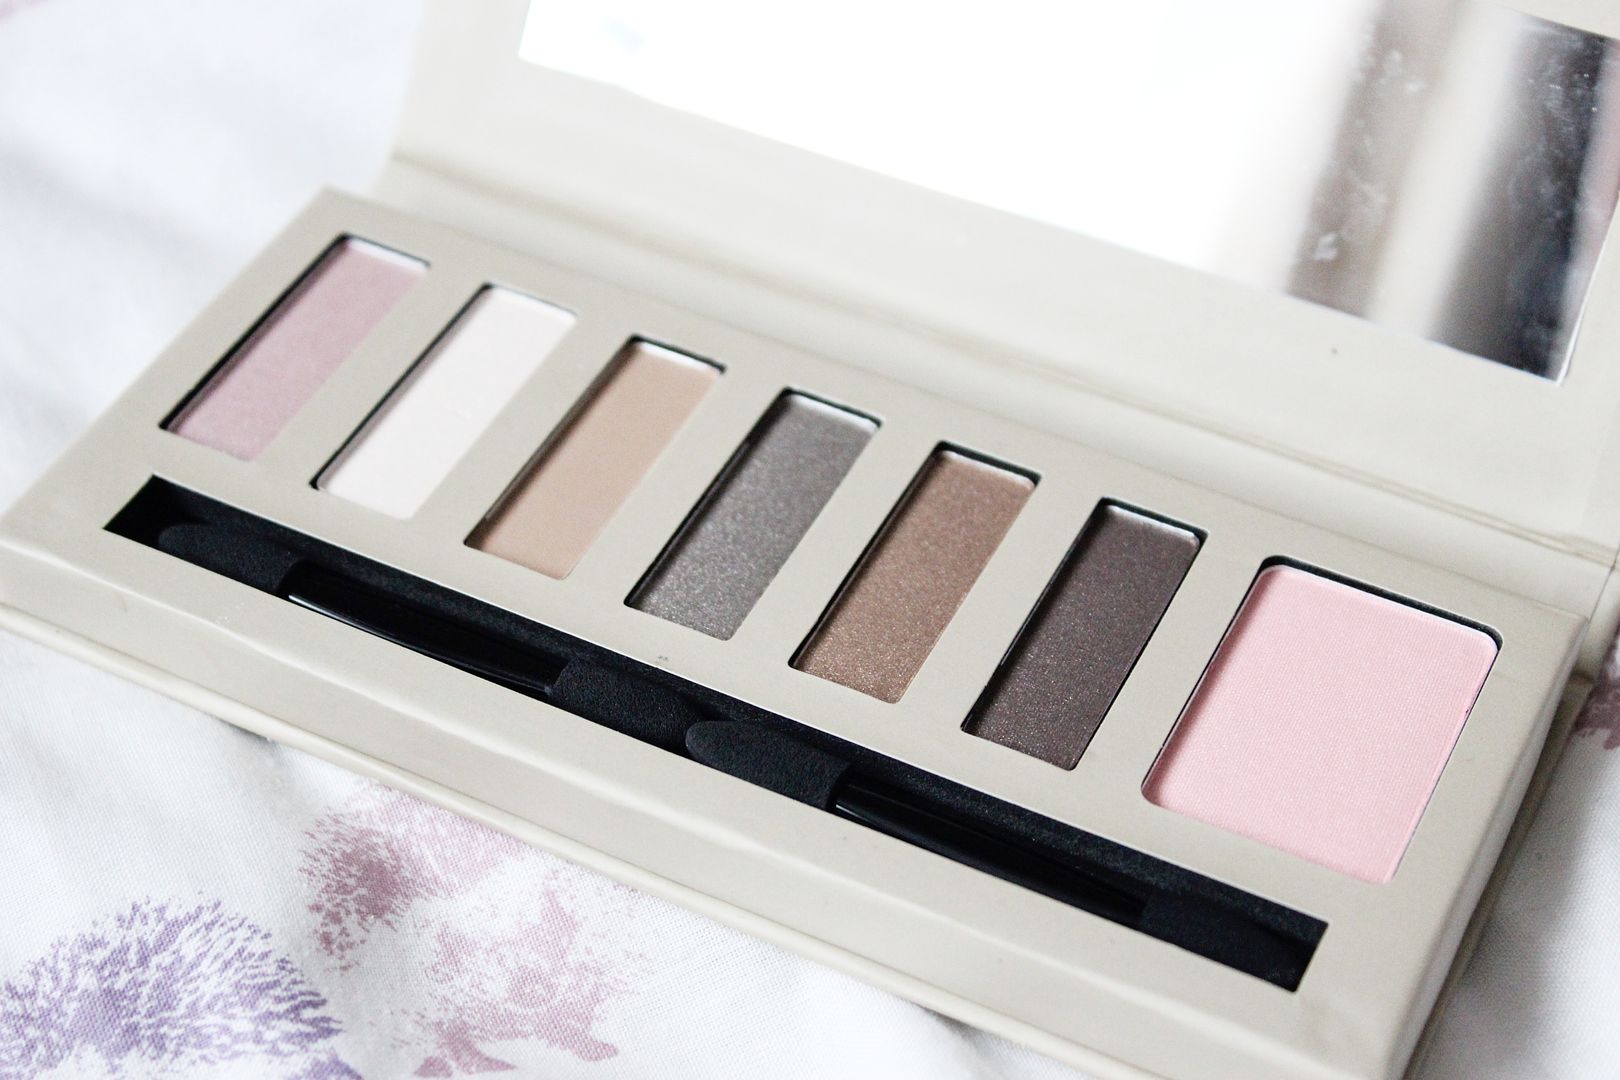 Barry M Natural Glow Shadow & Blush Palette